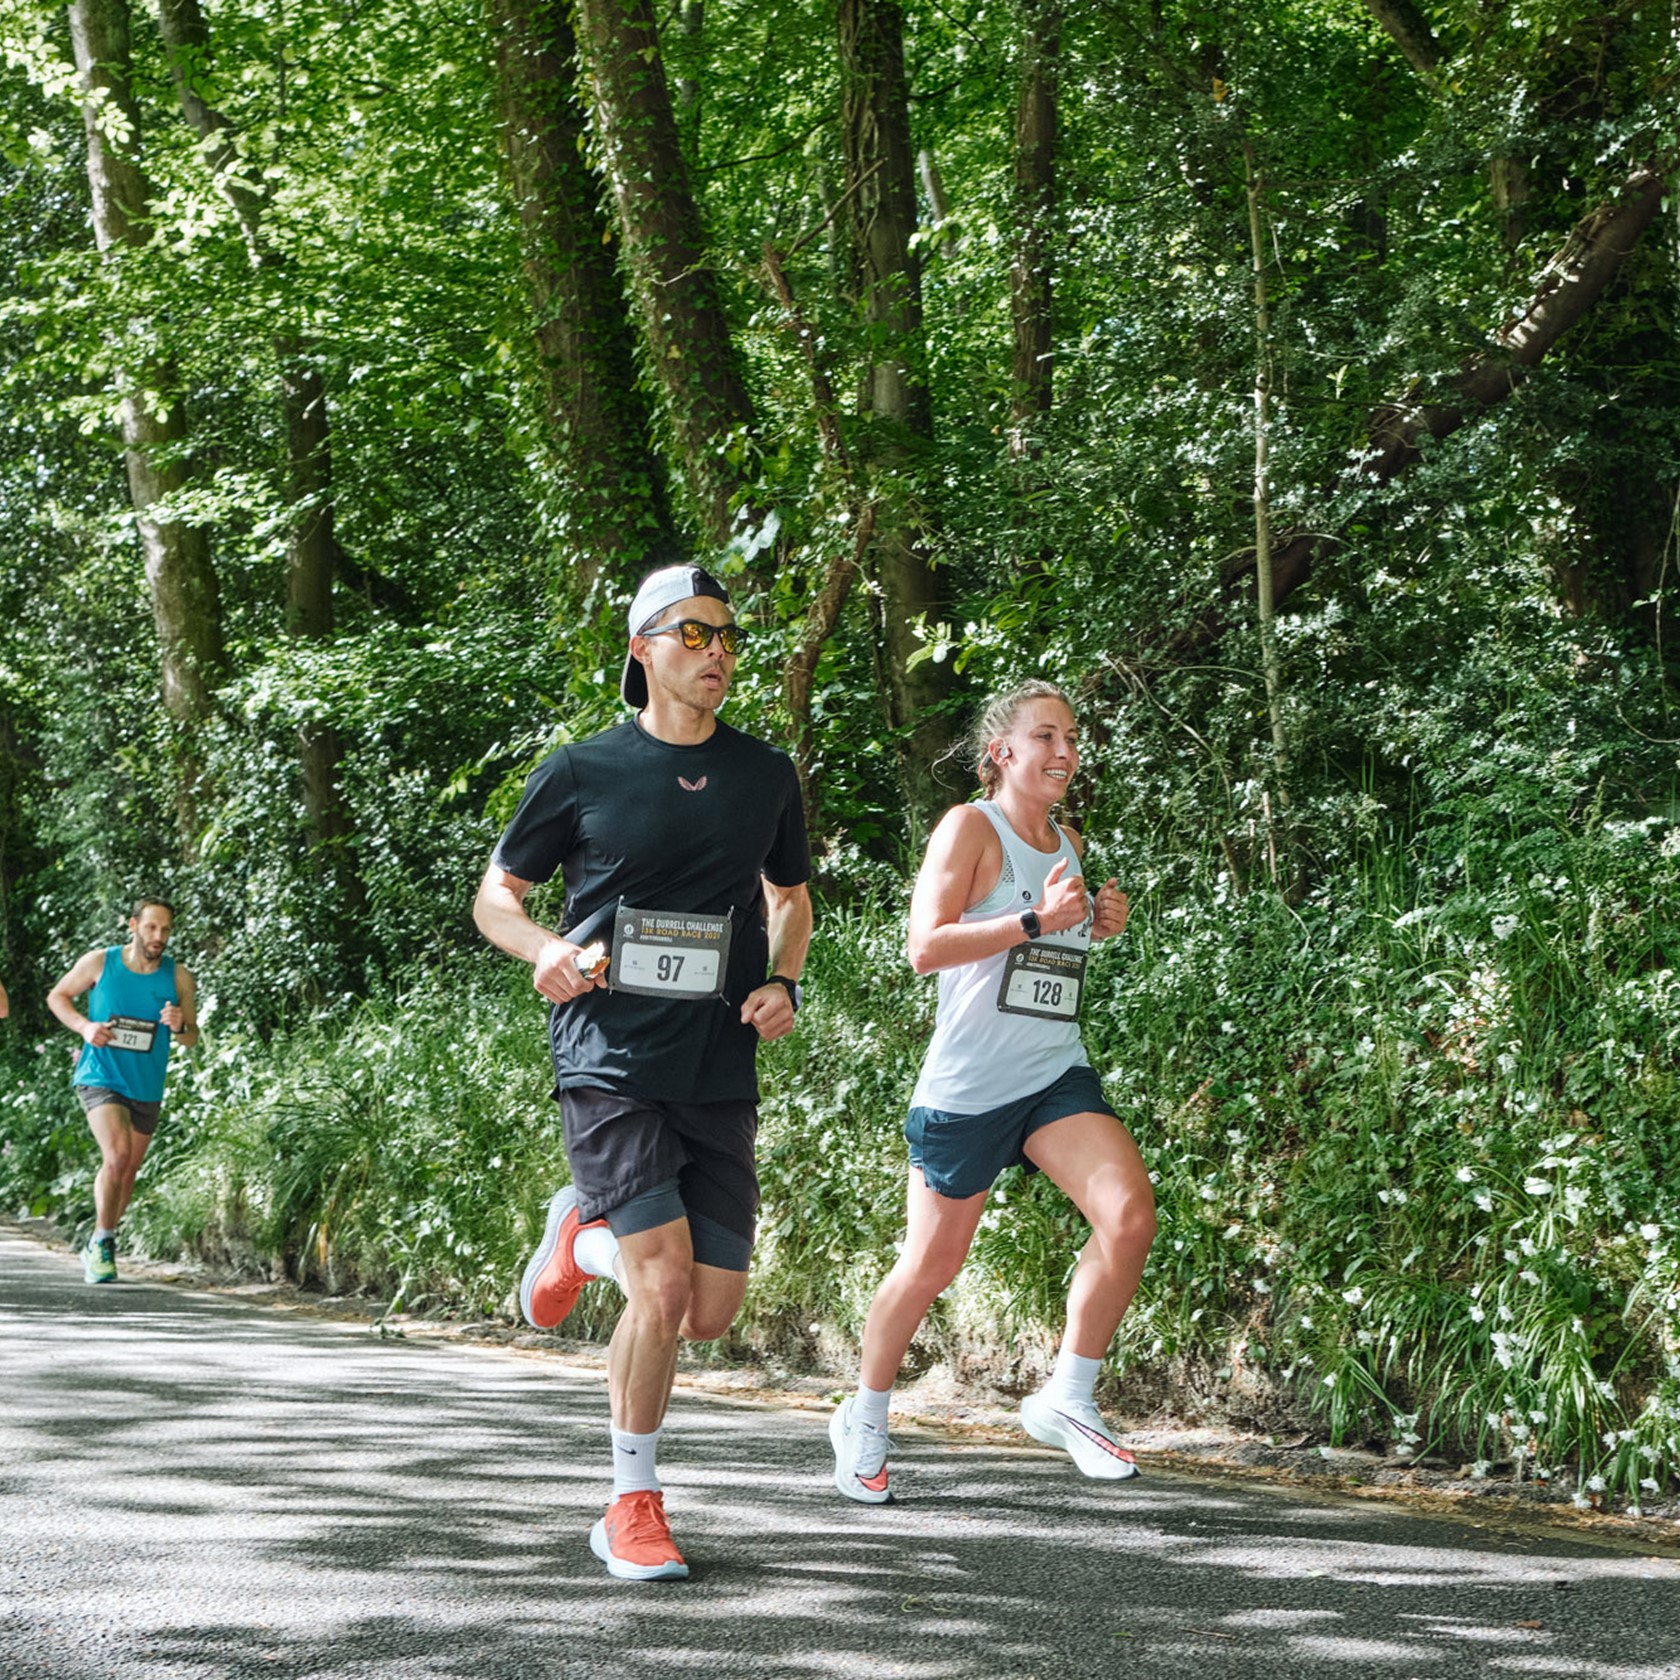 Two runners compete in the Durrell Challenge